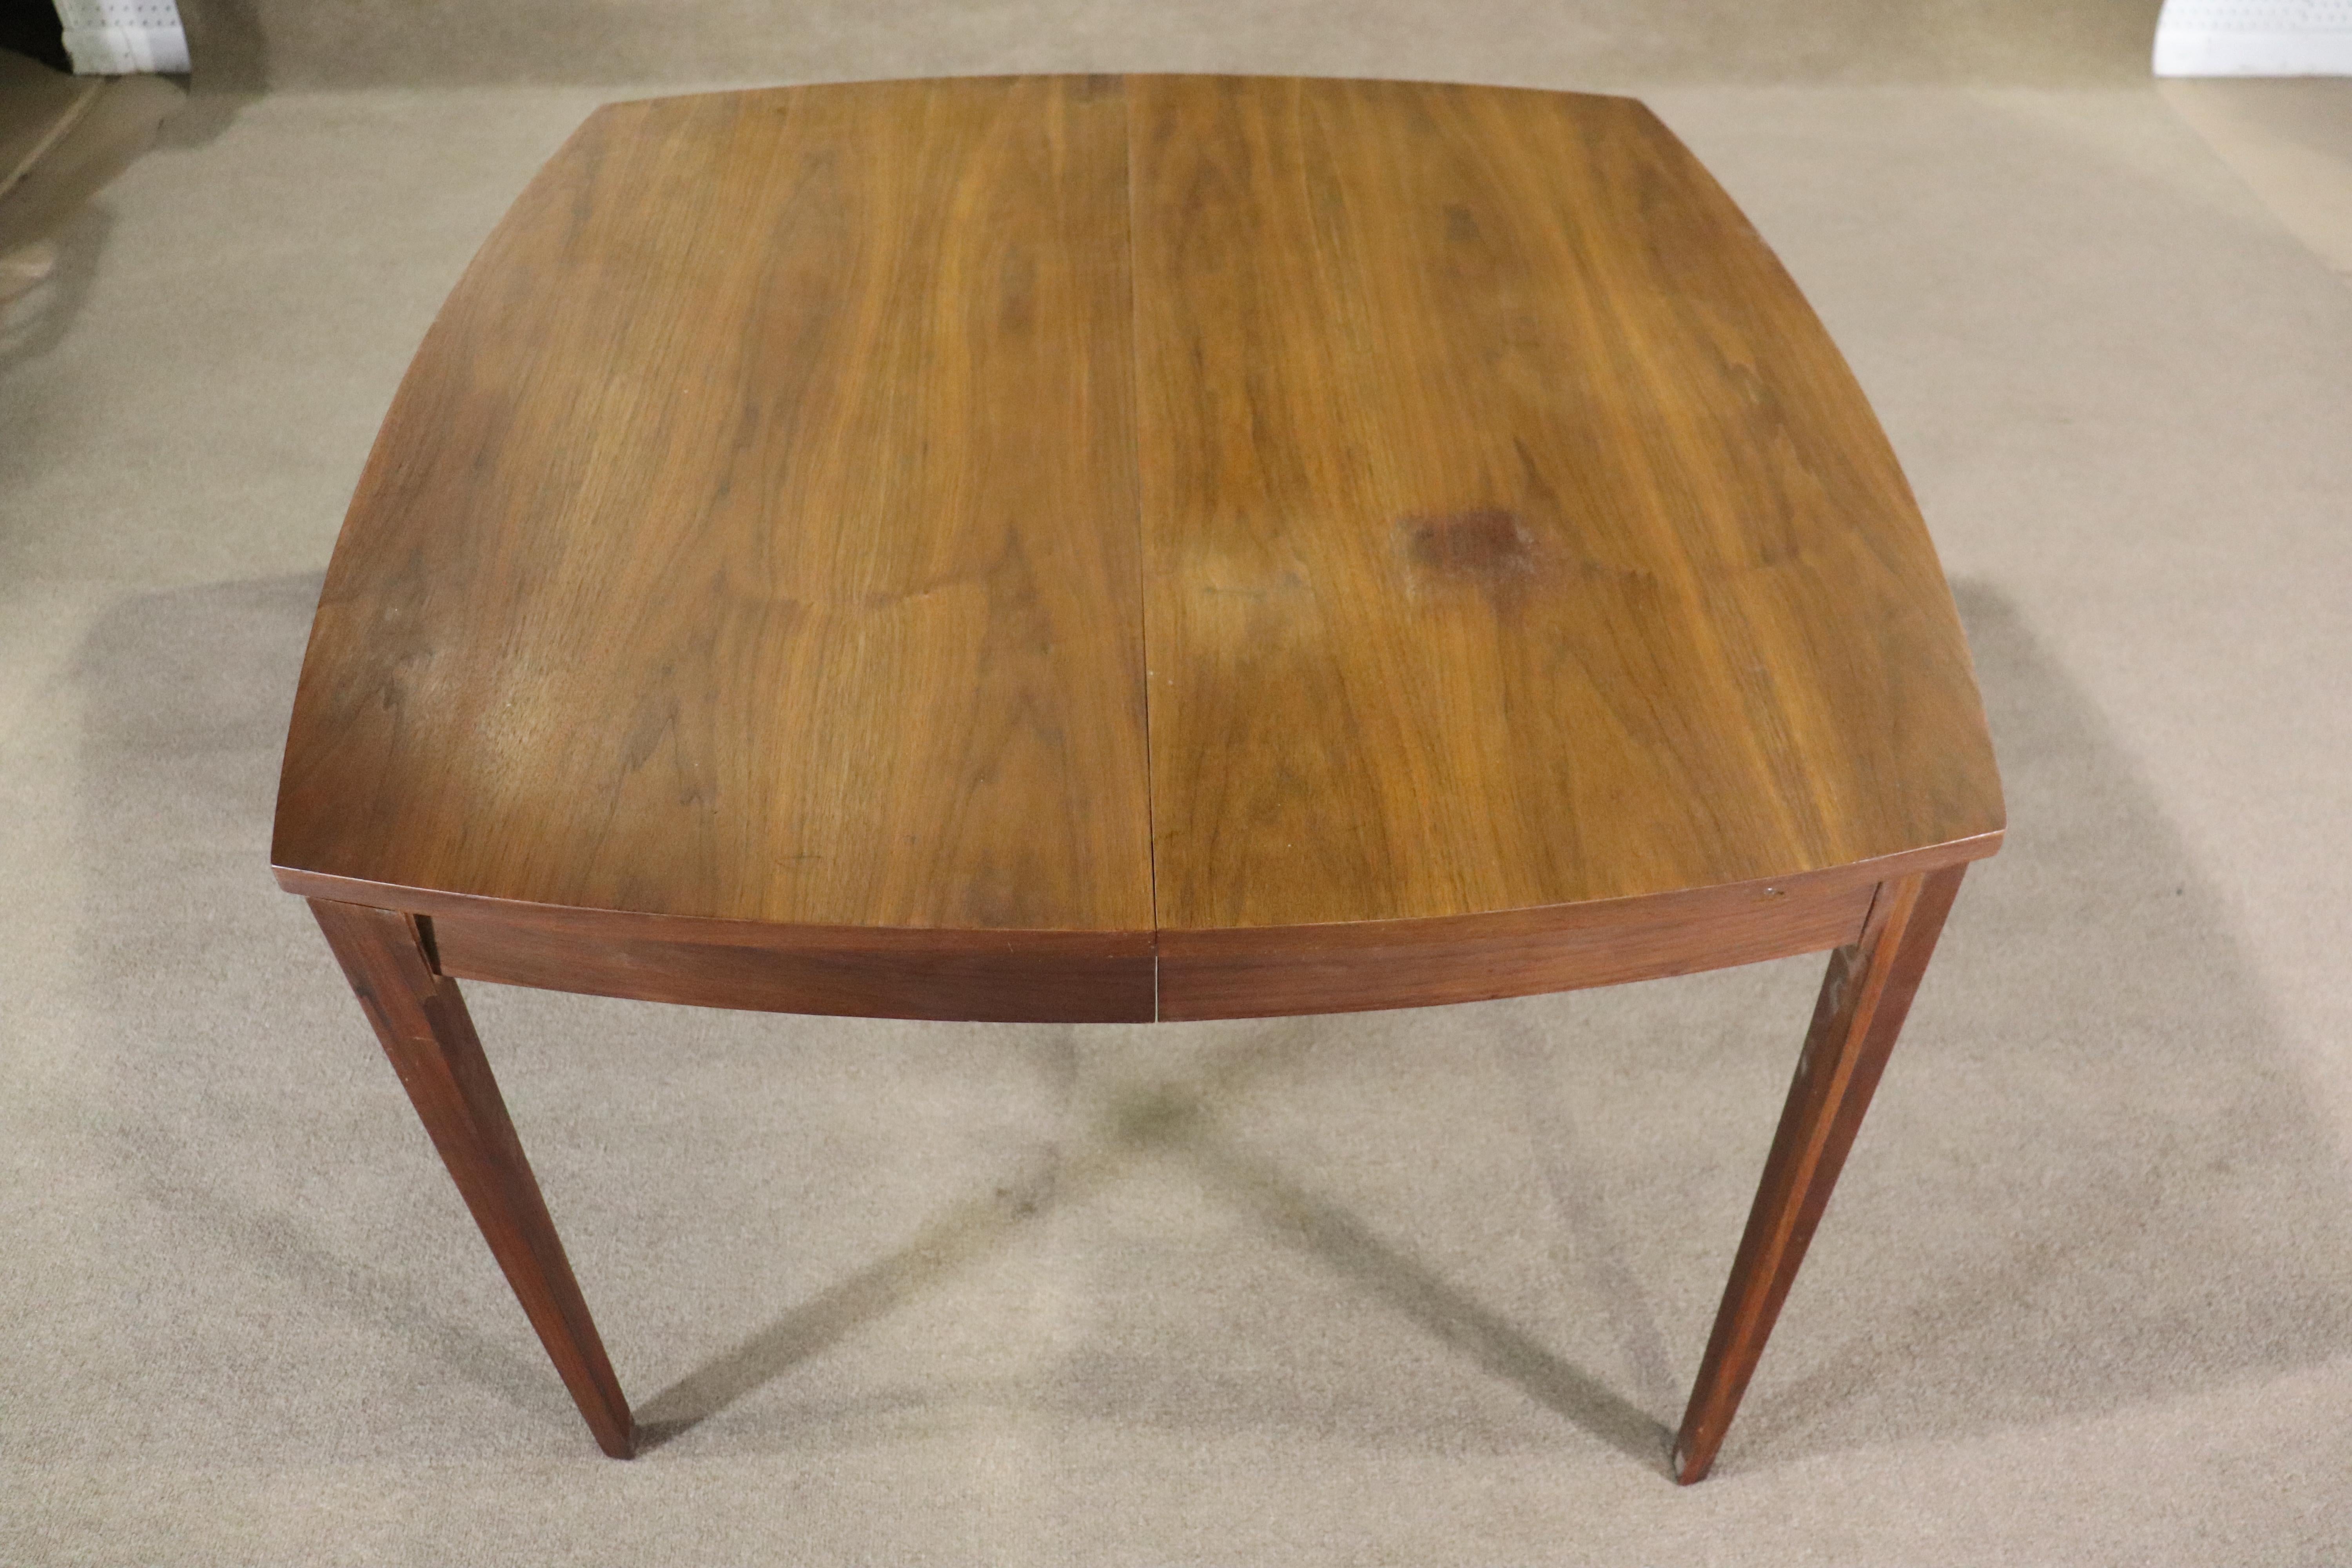 This Walnut dining table can be the perfect mid-century addition to your dining room, whatever the size. With wonderfully crafted sculpted legs, walnut veneer, and 3 leaves to constitute the modern design, this modular dining table can fit a variety